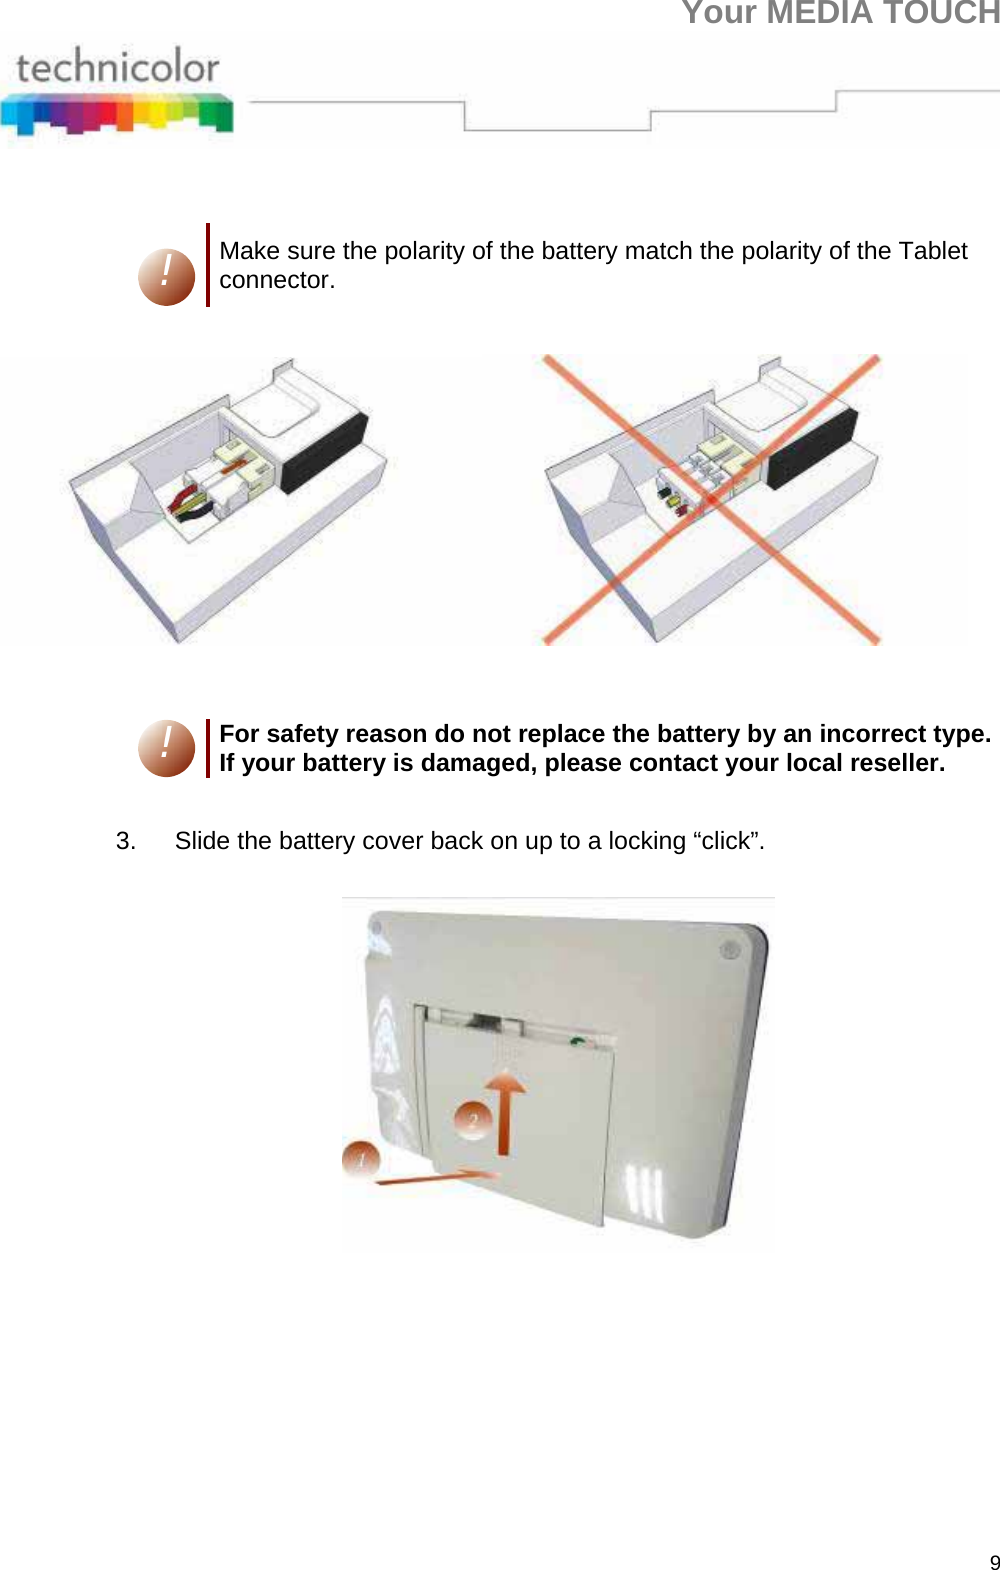 Your MEDIA TOUCH 9    ! Make sure the polarity of the battery match the polarity of the Tablet connector.    ! For safety reason do not replace the battery by an incorrect type. If your battery is damaged, please contact your local reseller.  3.  Slide the battery cover back on up to a locking “click”.     